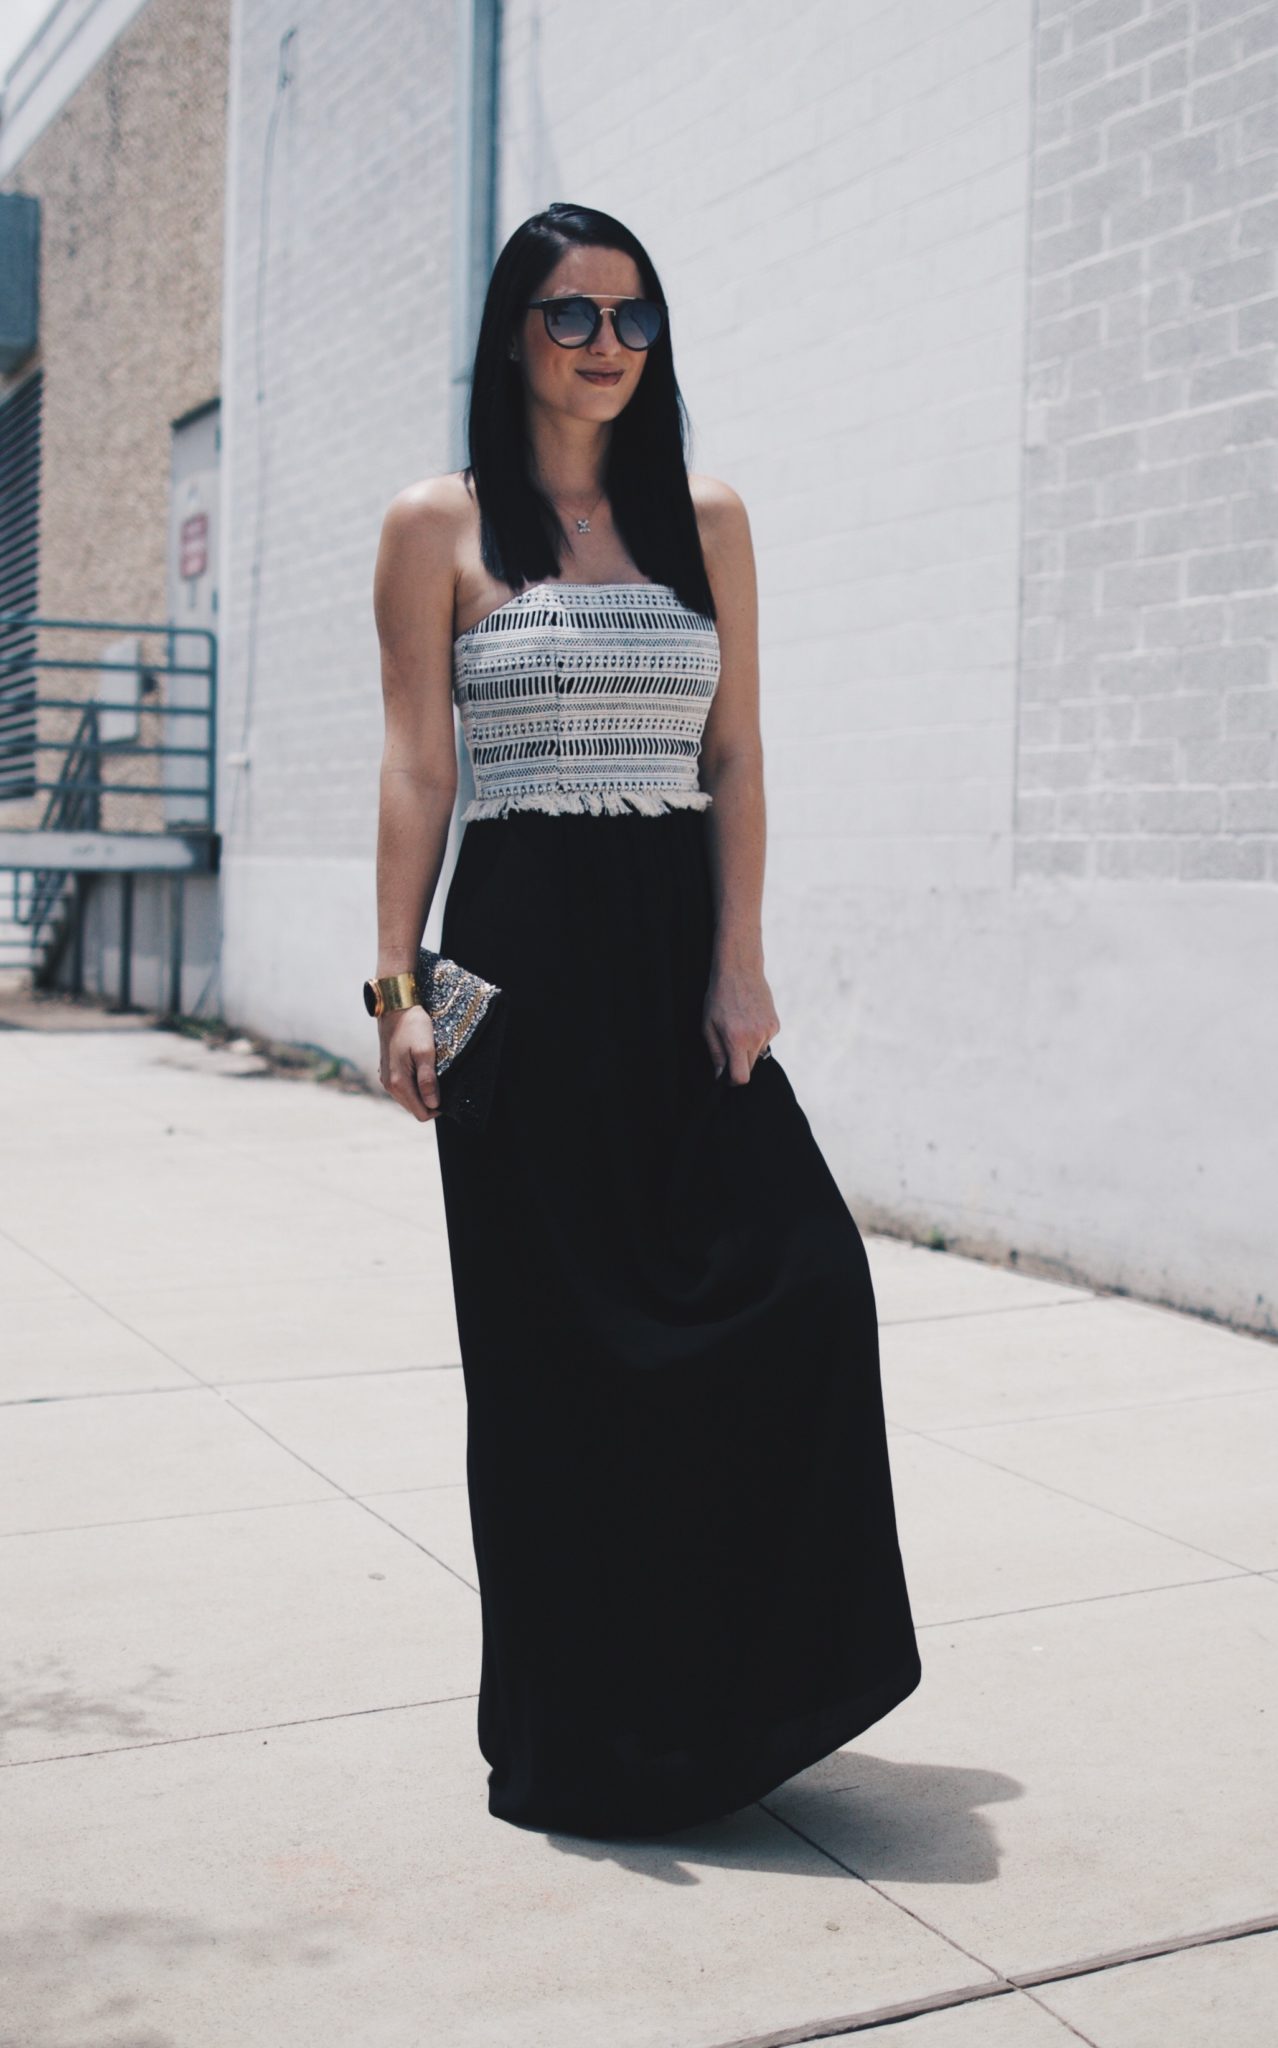 Strapless Dress | how to style a strapless dress | how to wear a strapless dress | summer fashion tips | summer outfit ideas | summer style tips | what to wear for summer | warm weather fashion | fashion for summer | style tips for summer | outfit ideas for summer || Dressed to Kill